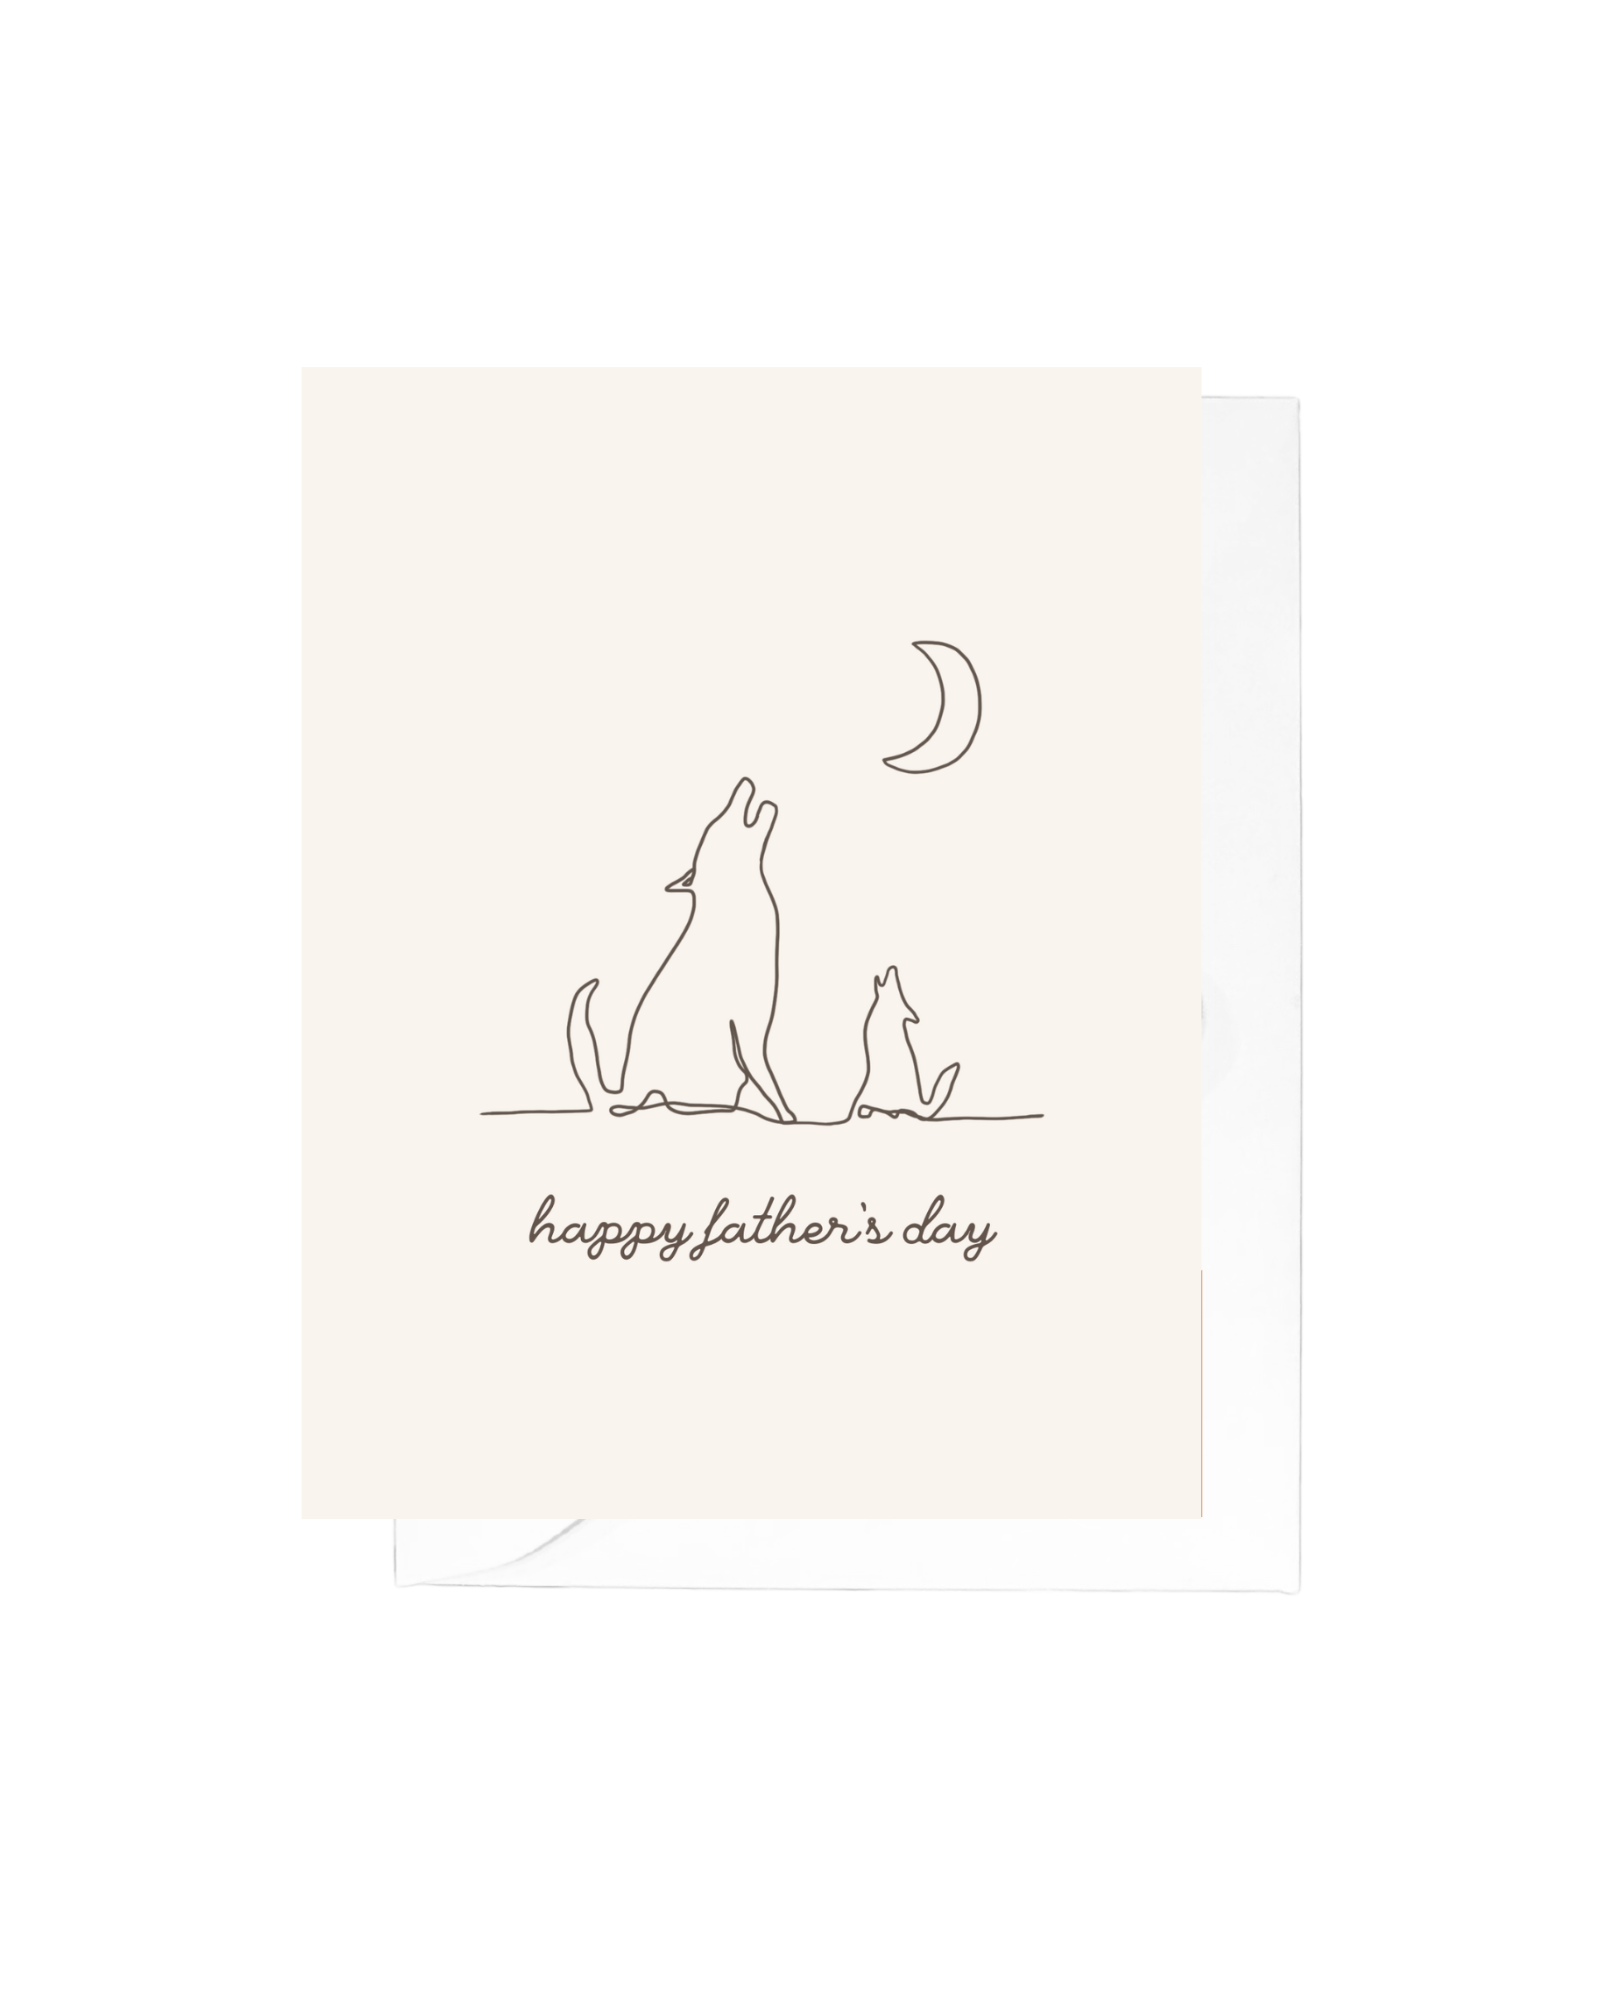 Coyote Father's Day Greeting Card